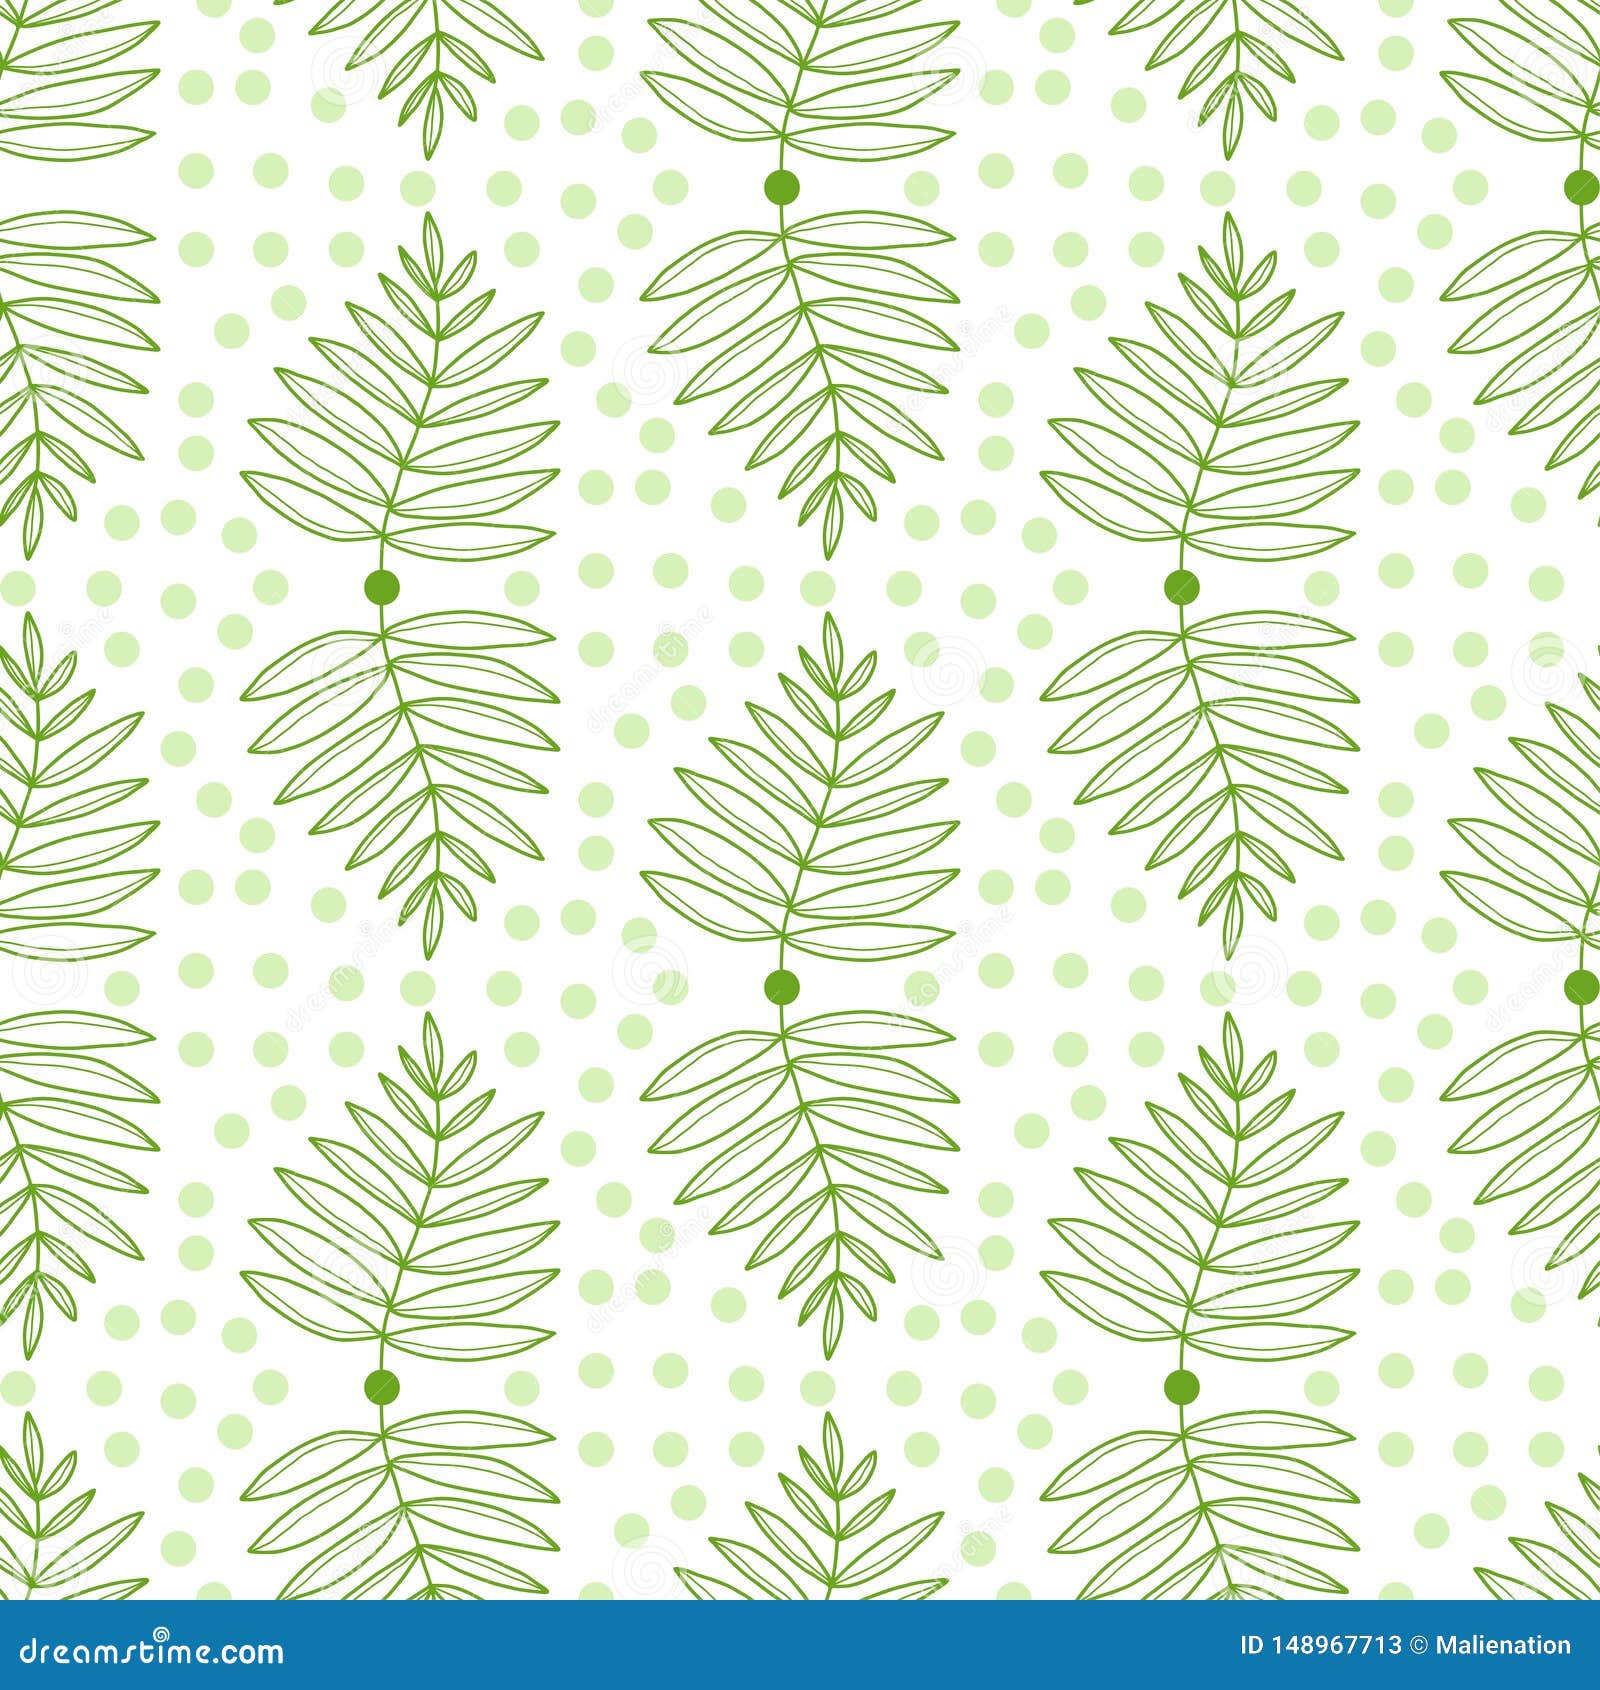 Leaves Seamless Pattern. Nature Repeat Background. Tropical Green Leaves  Pattern Stock Vector - Illustration of background, elegant: 148967713